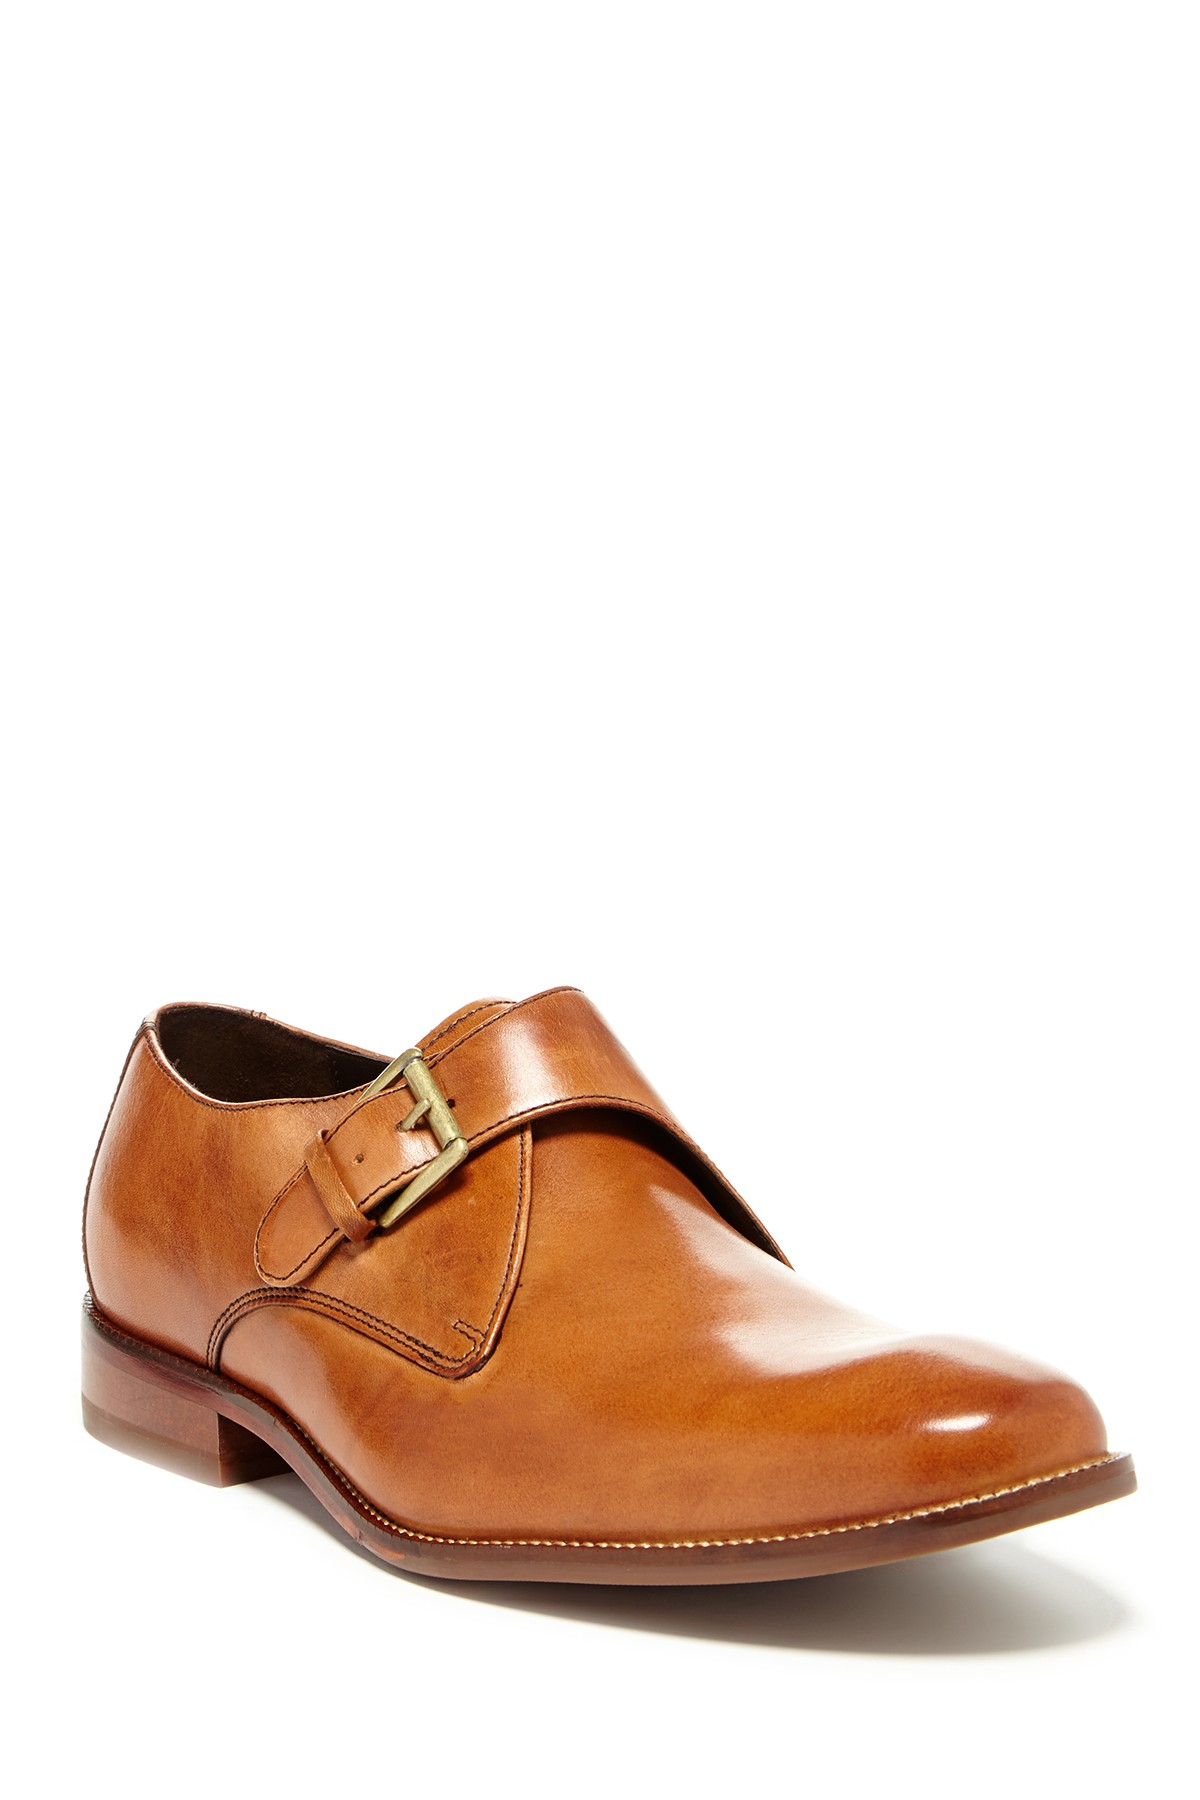 Cole Haan Williams Ii Monk Strap Shoe - Wide Width Available in Brown for  Men | Lyst